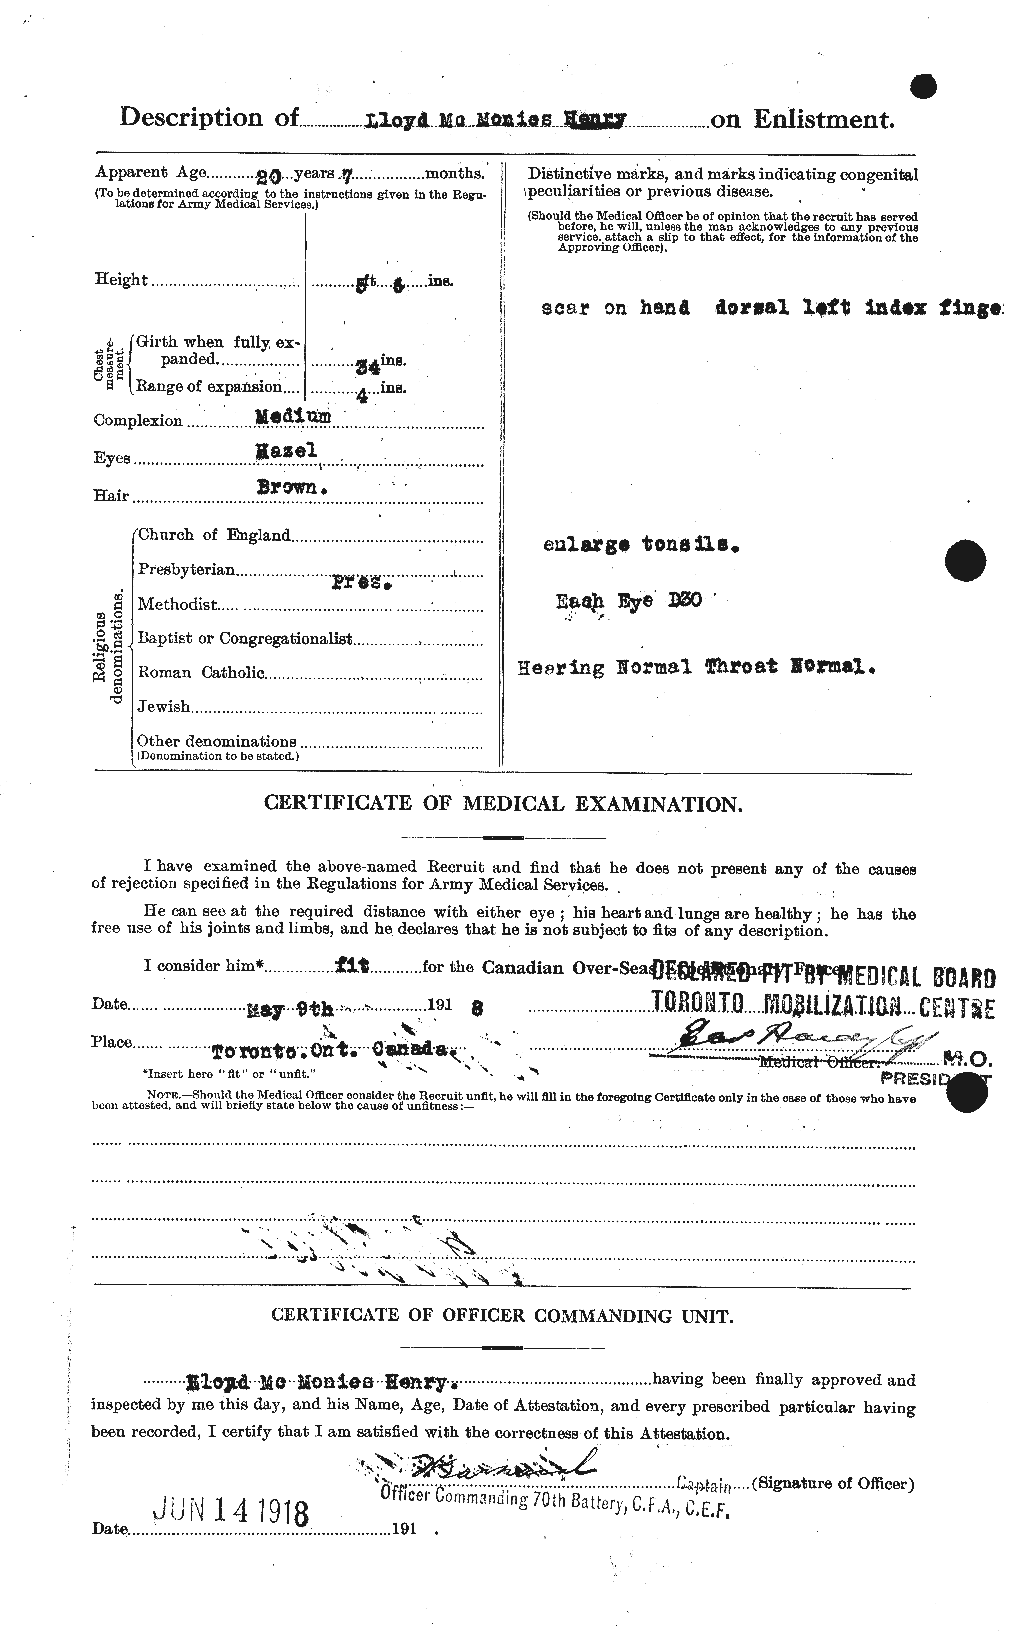 Personnel Records of the First World War - CEF 387657b